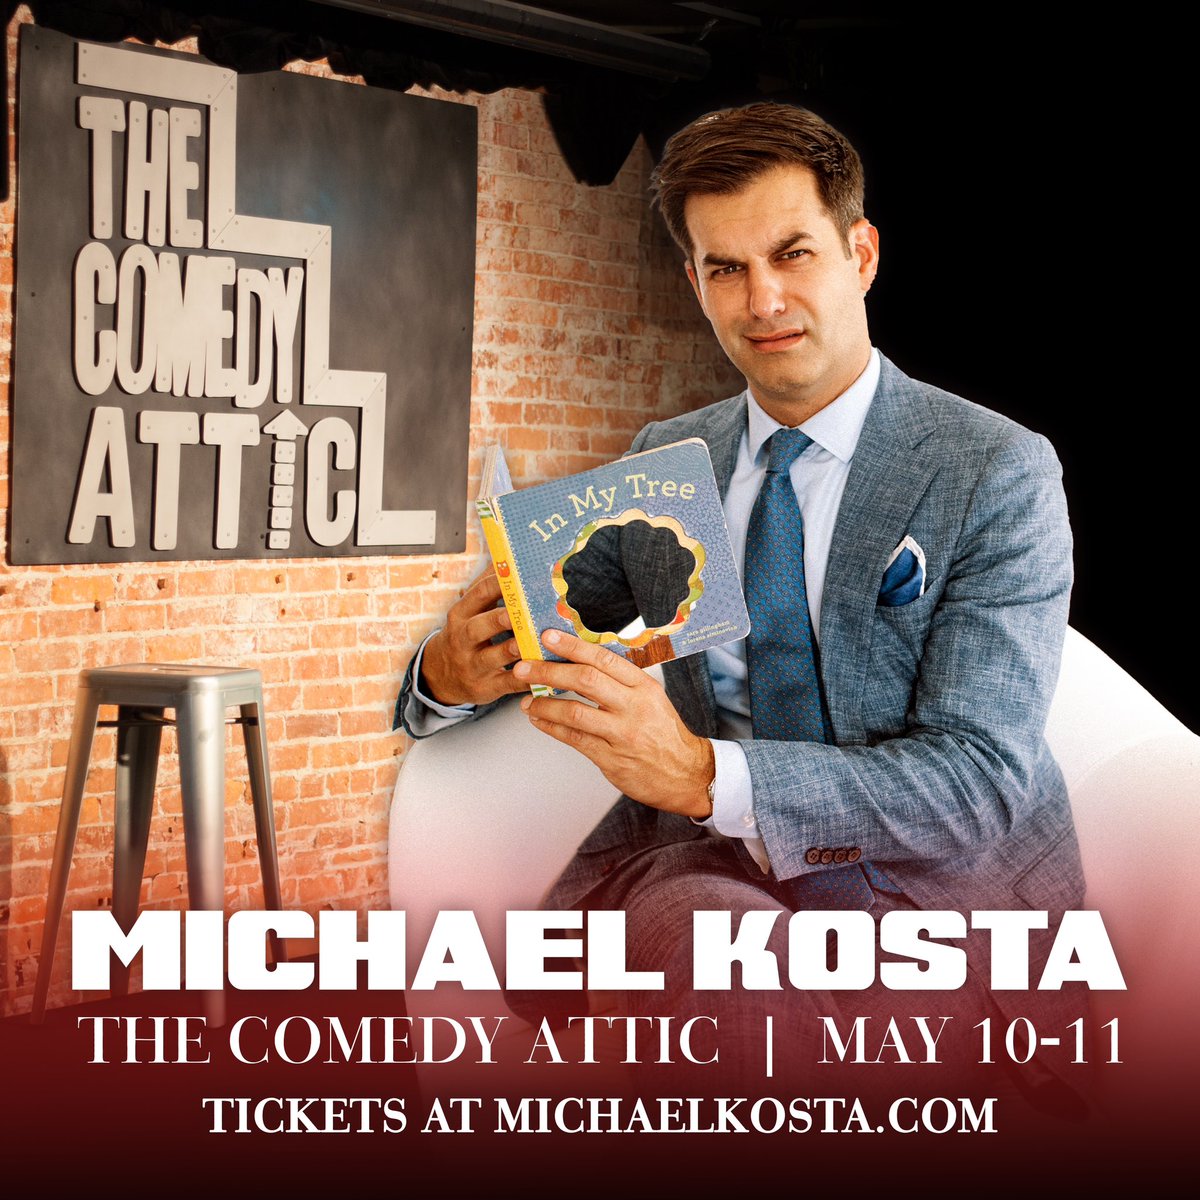 I’m reading off my favorite jokes in Bloomington, IN at @comedyattic May 10-11. Be there or be square. #MichaelKosta #Standup #Indiana Get your tickets: michaelkosta.com